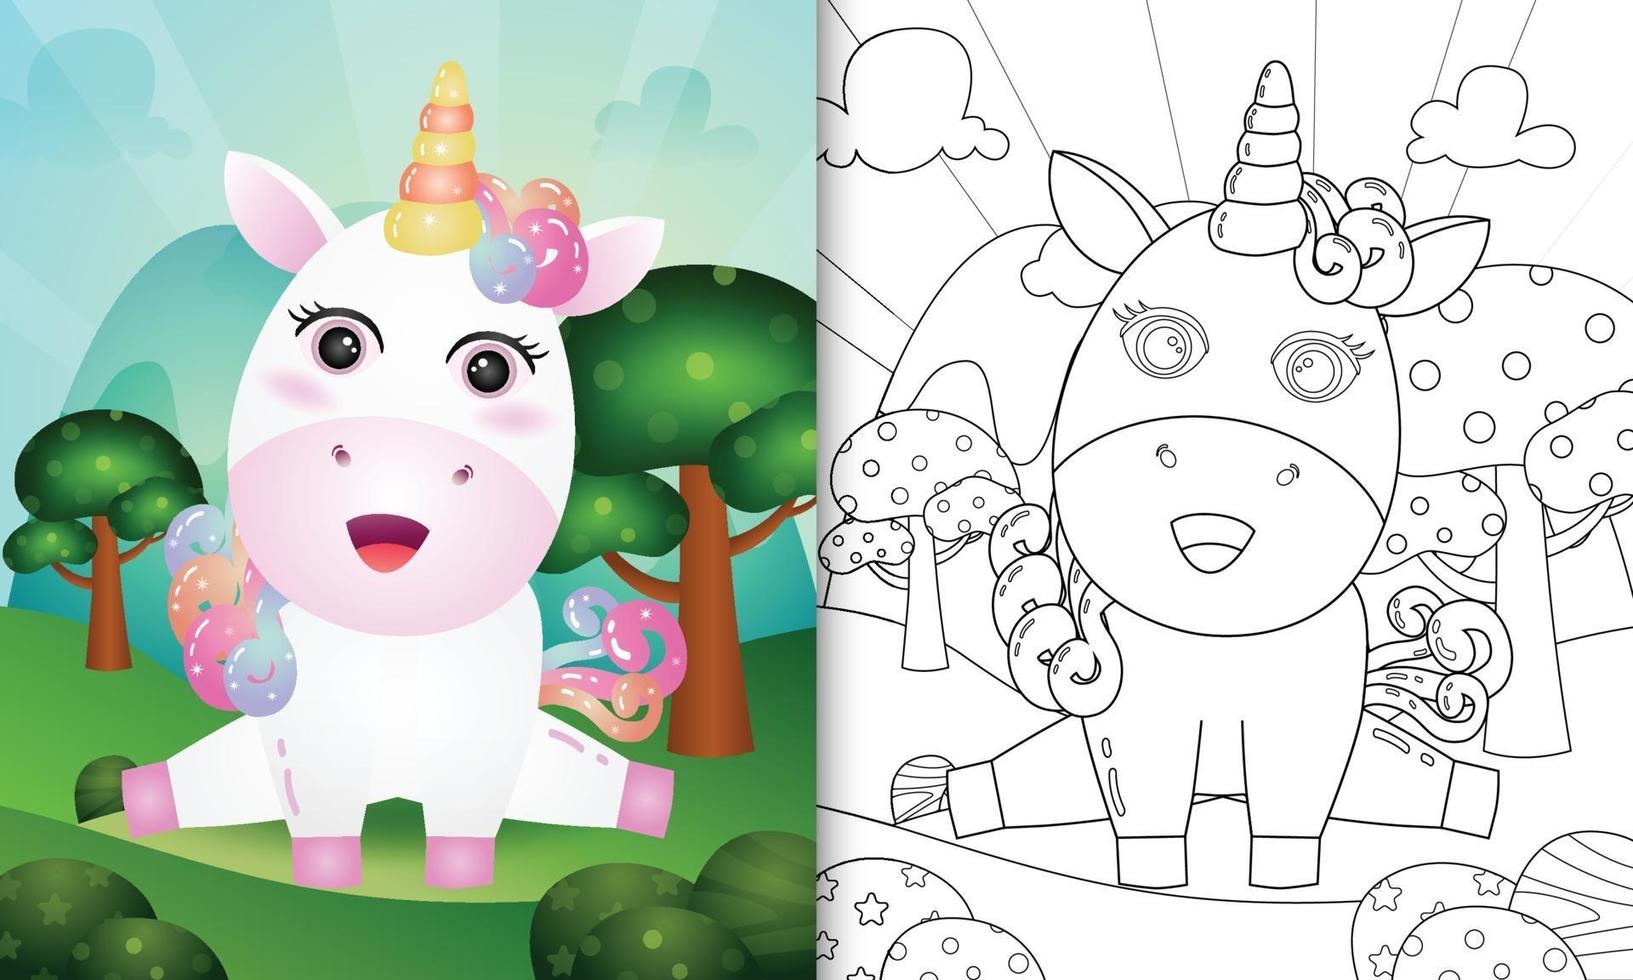 Coloring book for kids with a cute unicorn character illustration vector